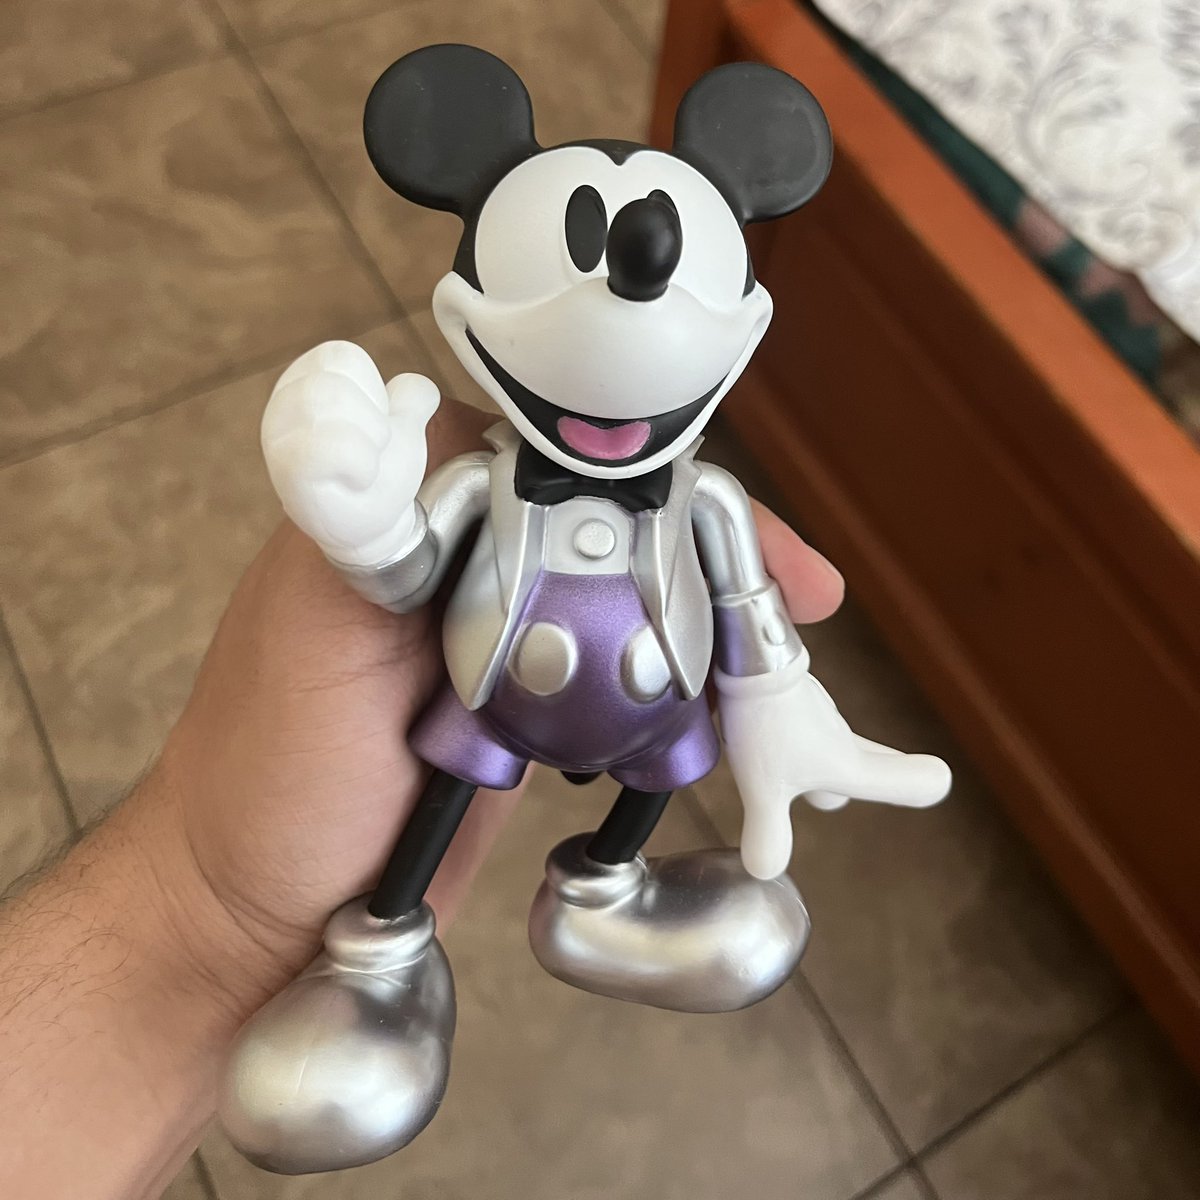 RT @fastman_real: Remembered I got this souvenir from Disneyland at Grad Nite and uh https://t.co/SJhb6BYMMO